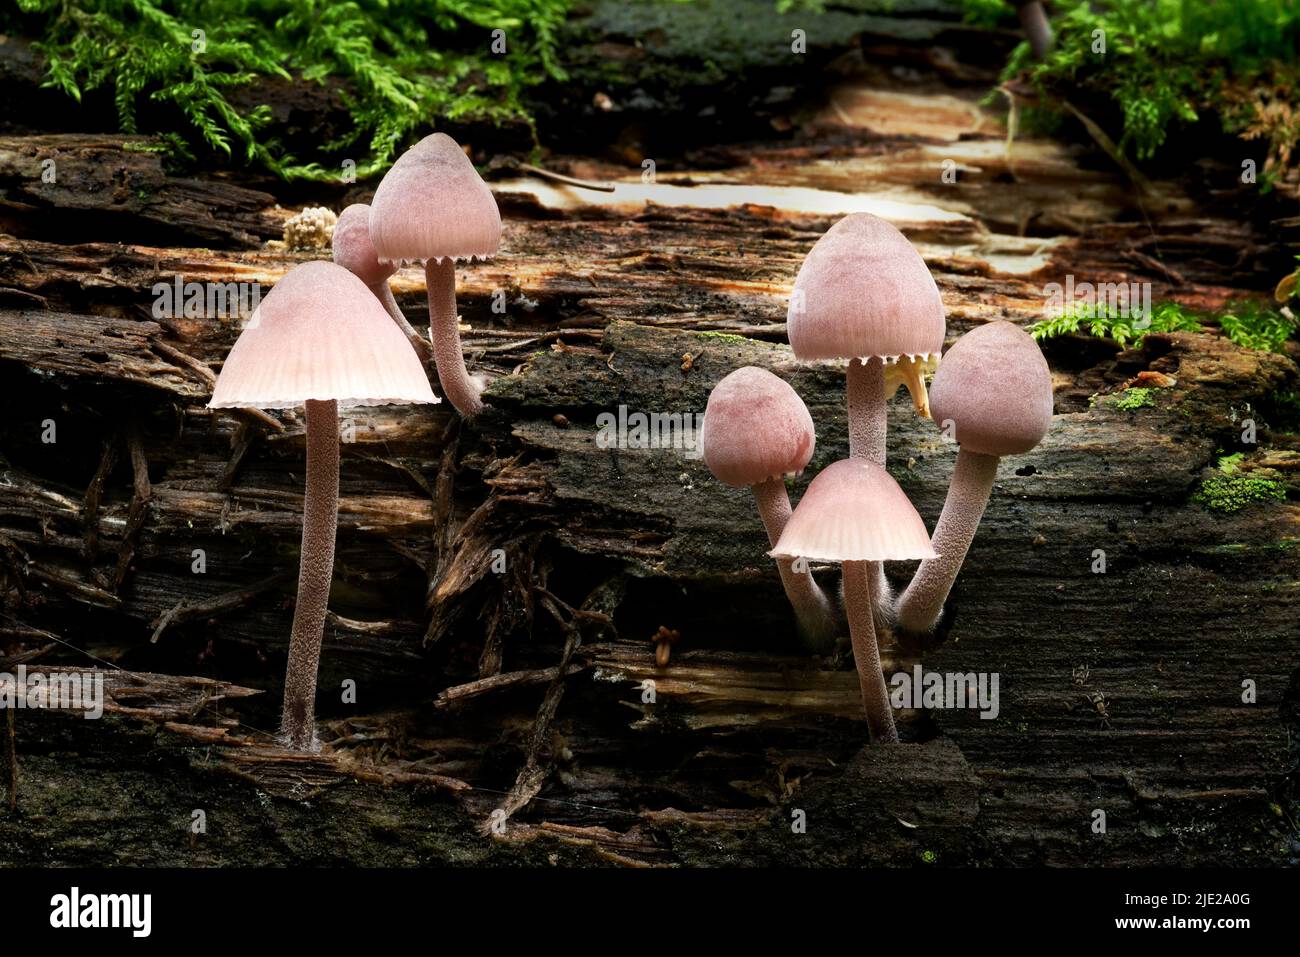 Wildlife of Europe- edible and inedible mushrooms growing in forest. Stock Photo